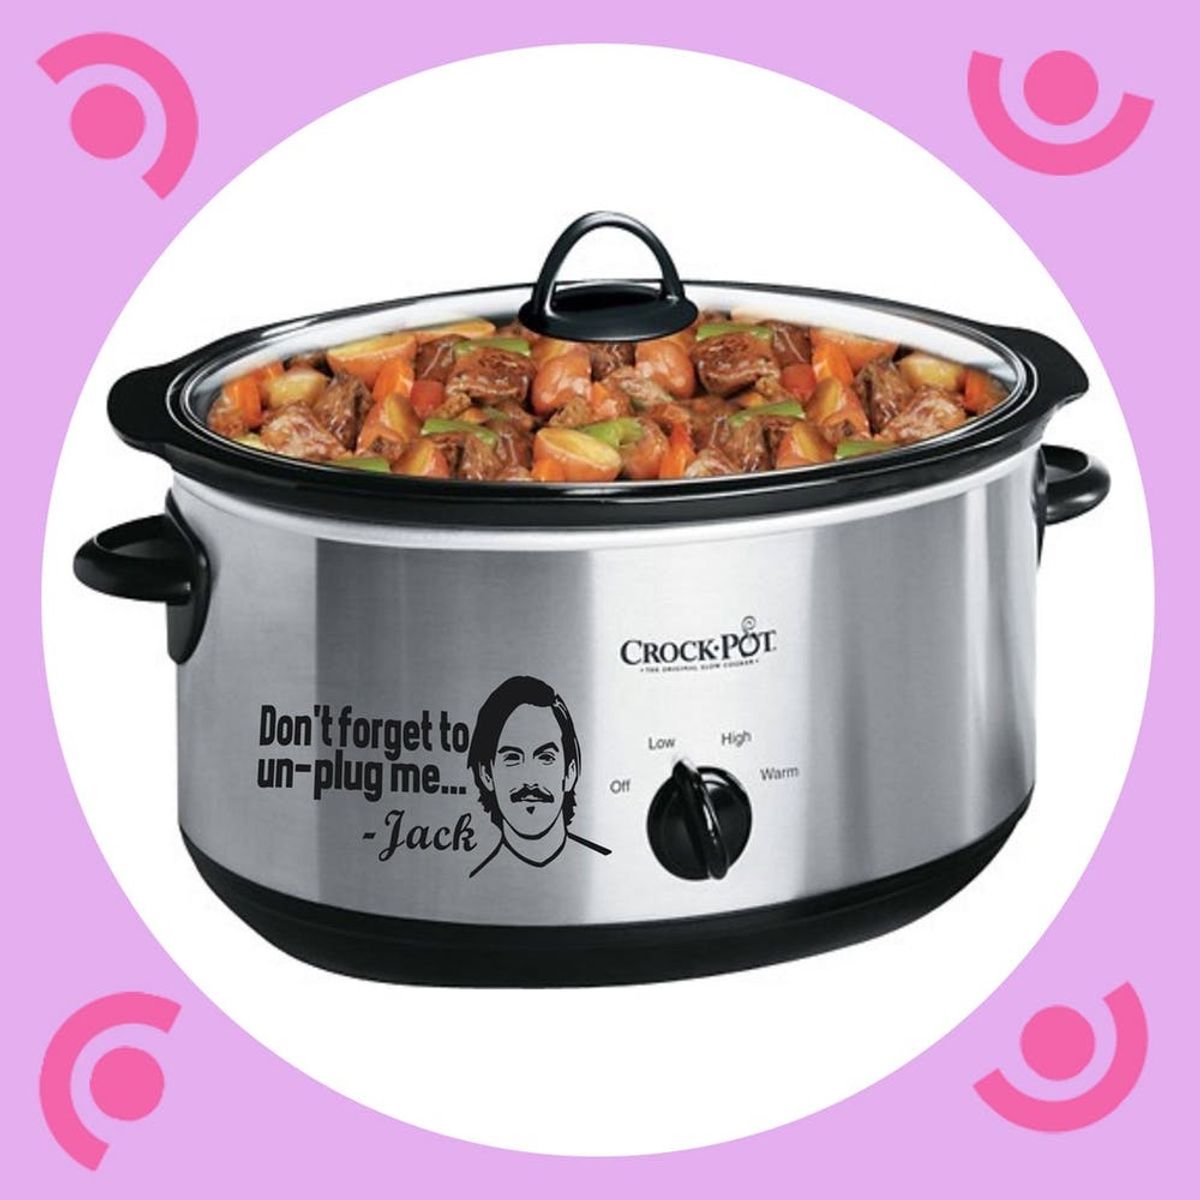 This New Slow Cooker Decal Will Make You Never Forget Jack… Or to Unplug Your Crock-Pot